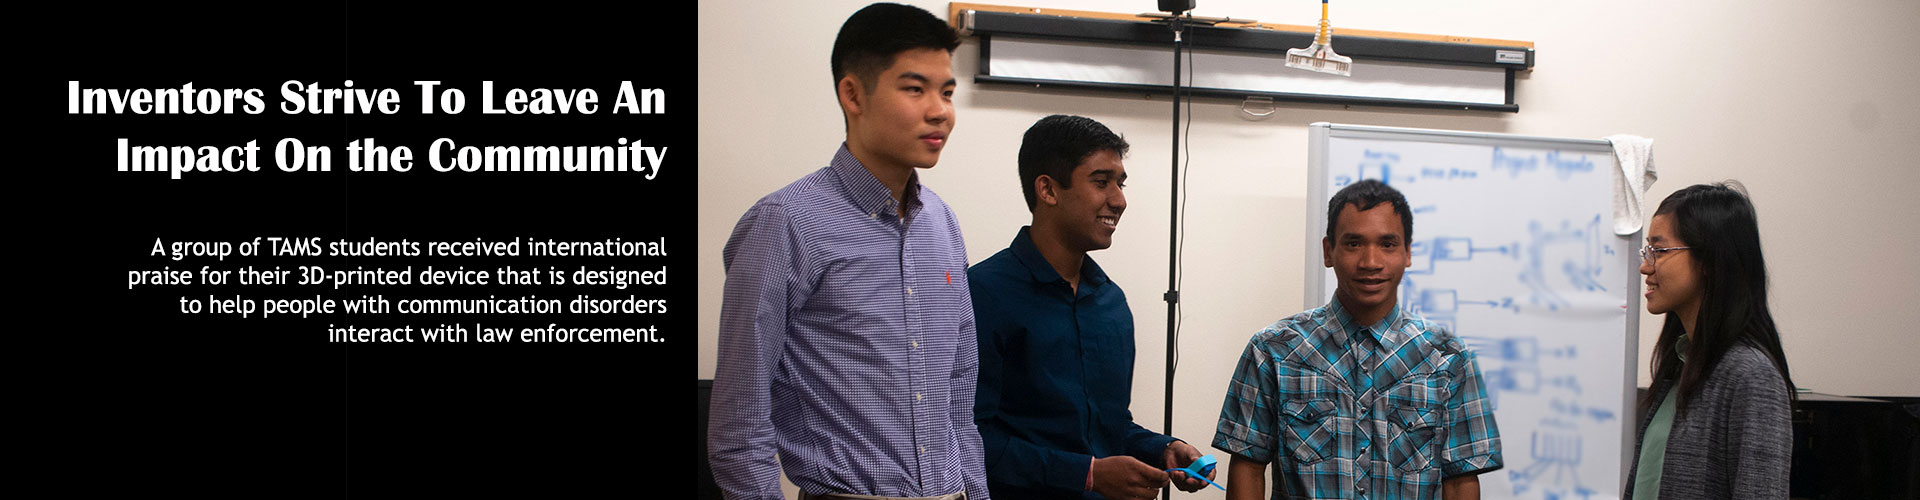 TAMS students develop device to help people with communication disorders